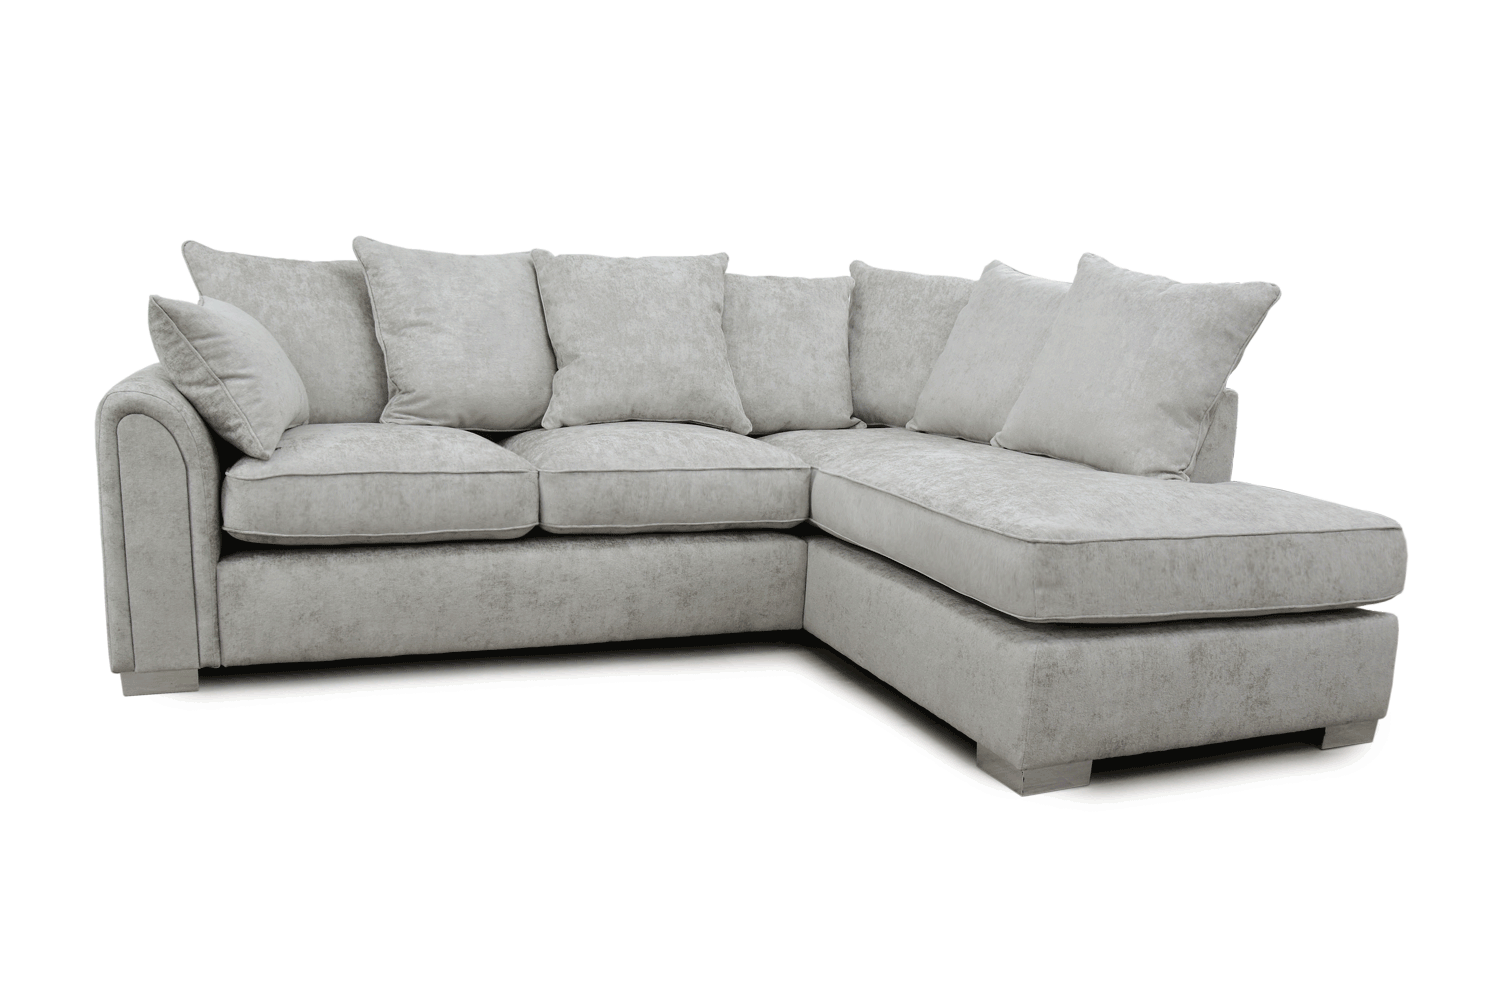 Battersea Sofa with Right Hand Facing Chaise Video Showing Footstool